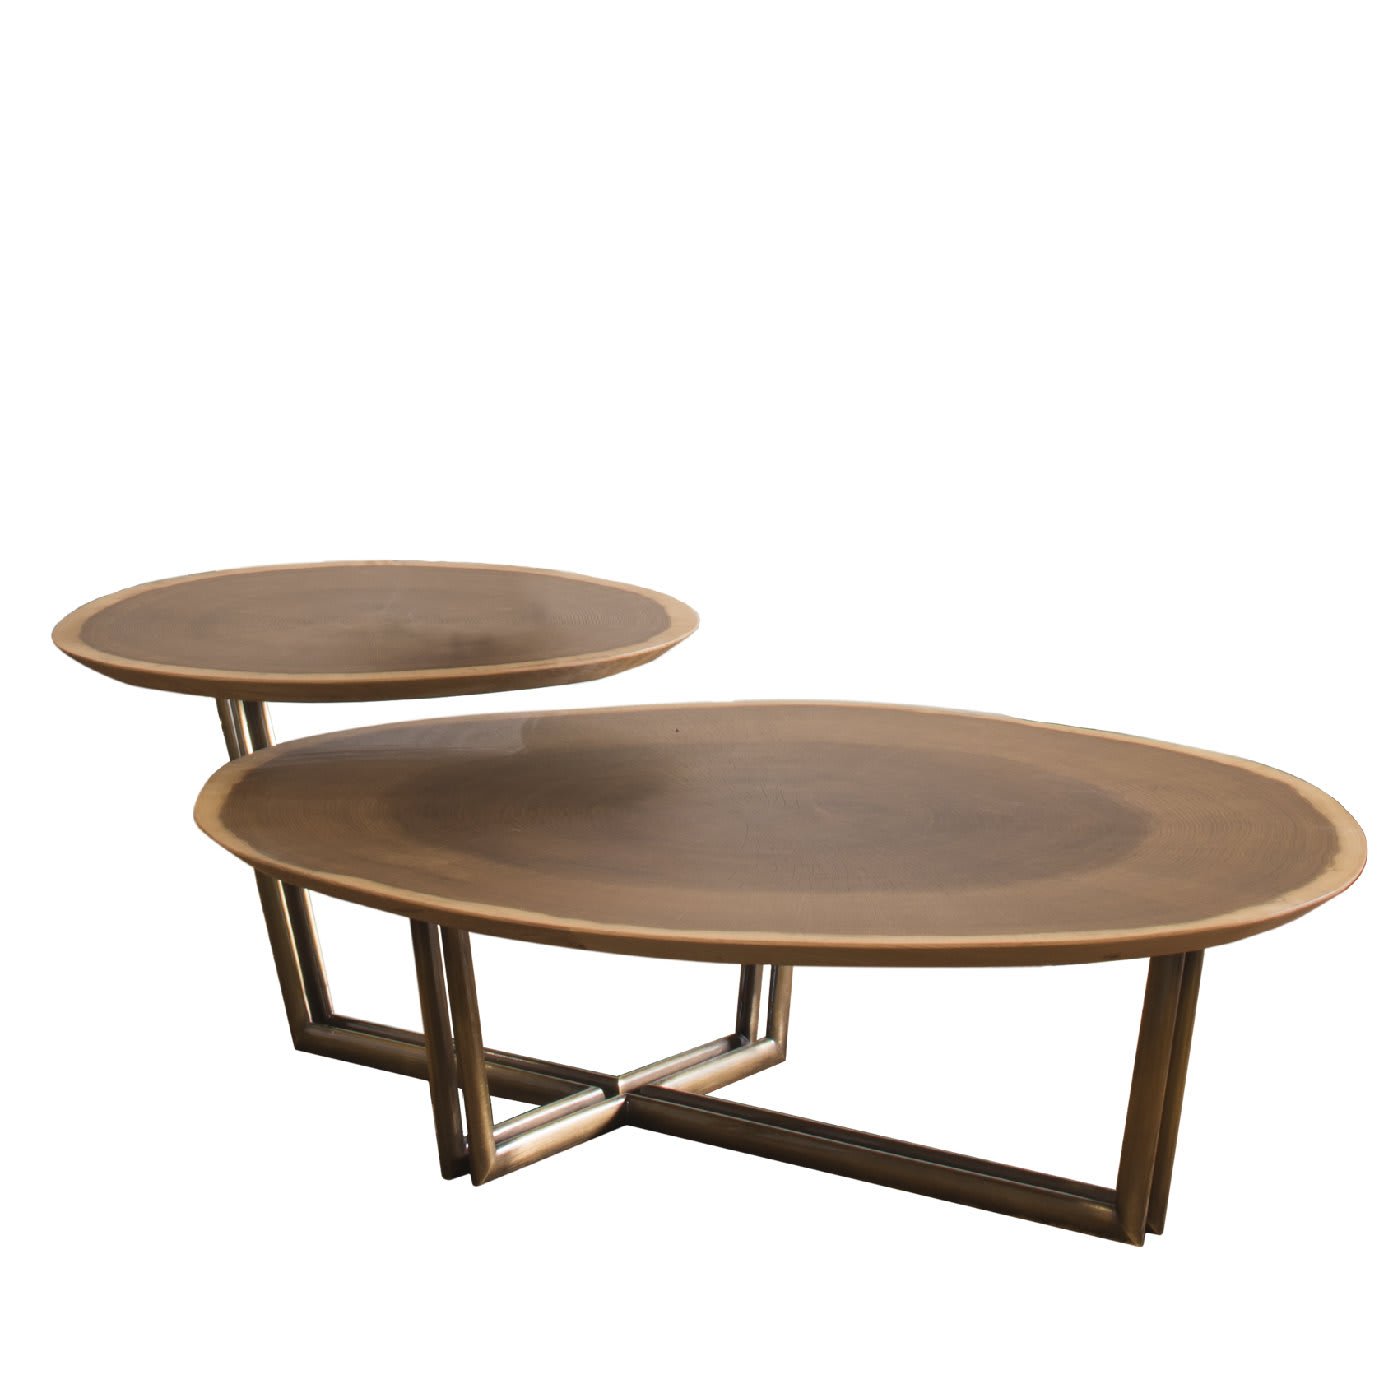 Poesia Double Coffee Table - Bamax